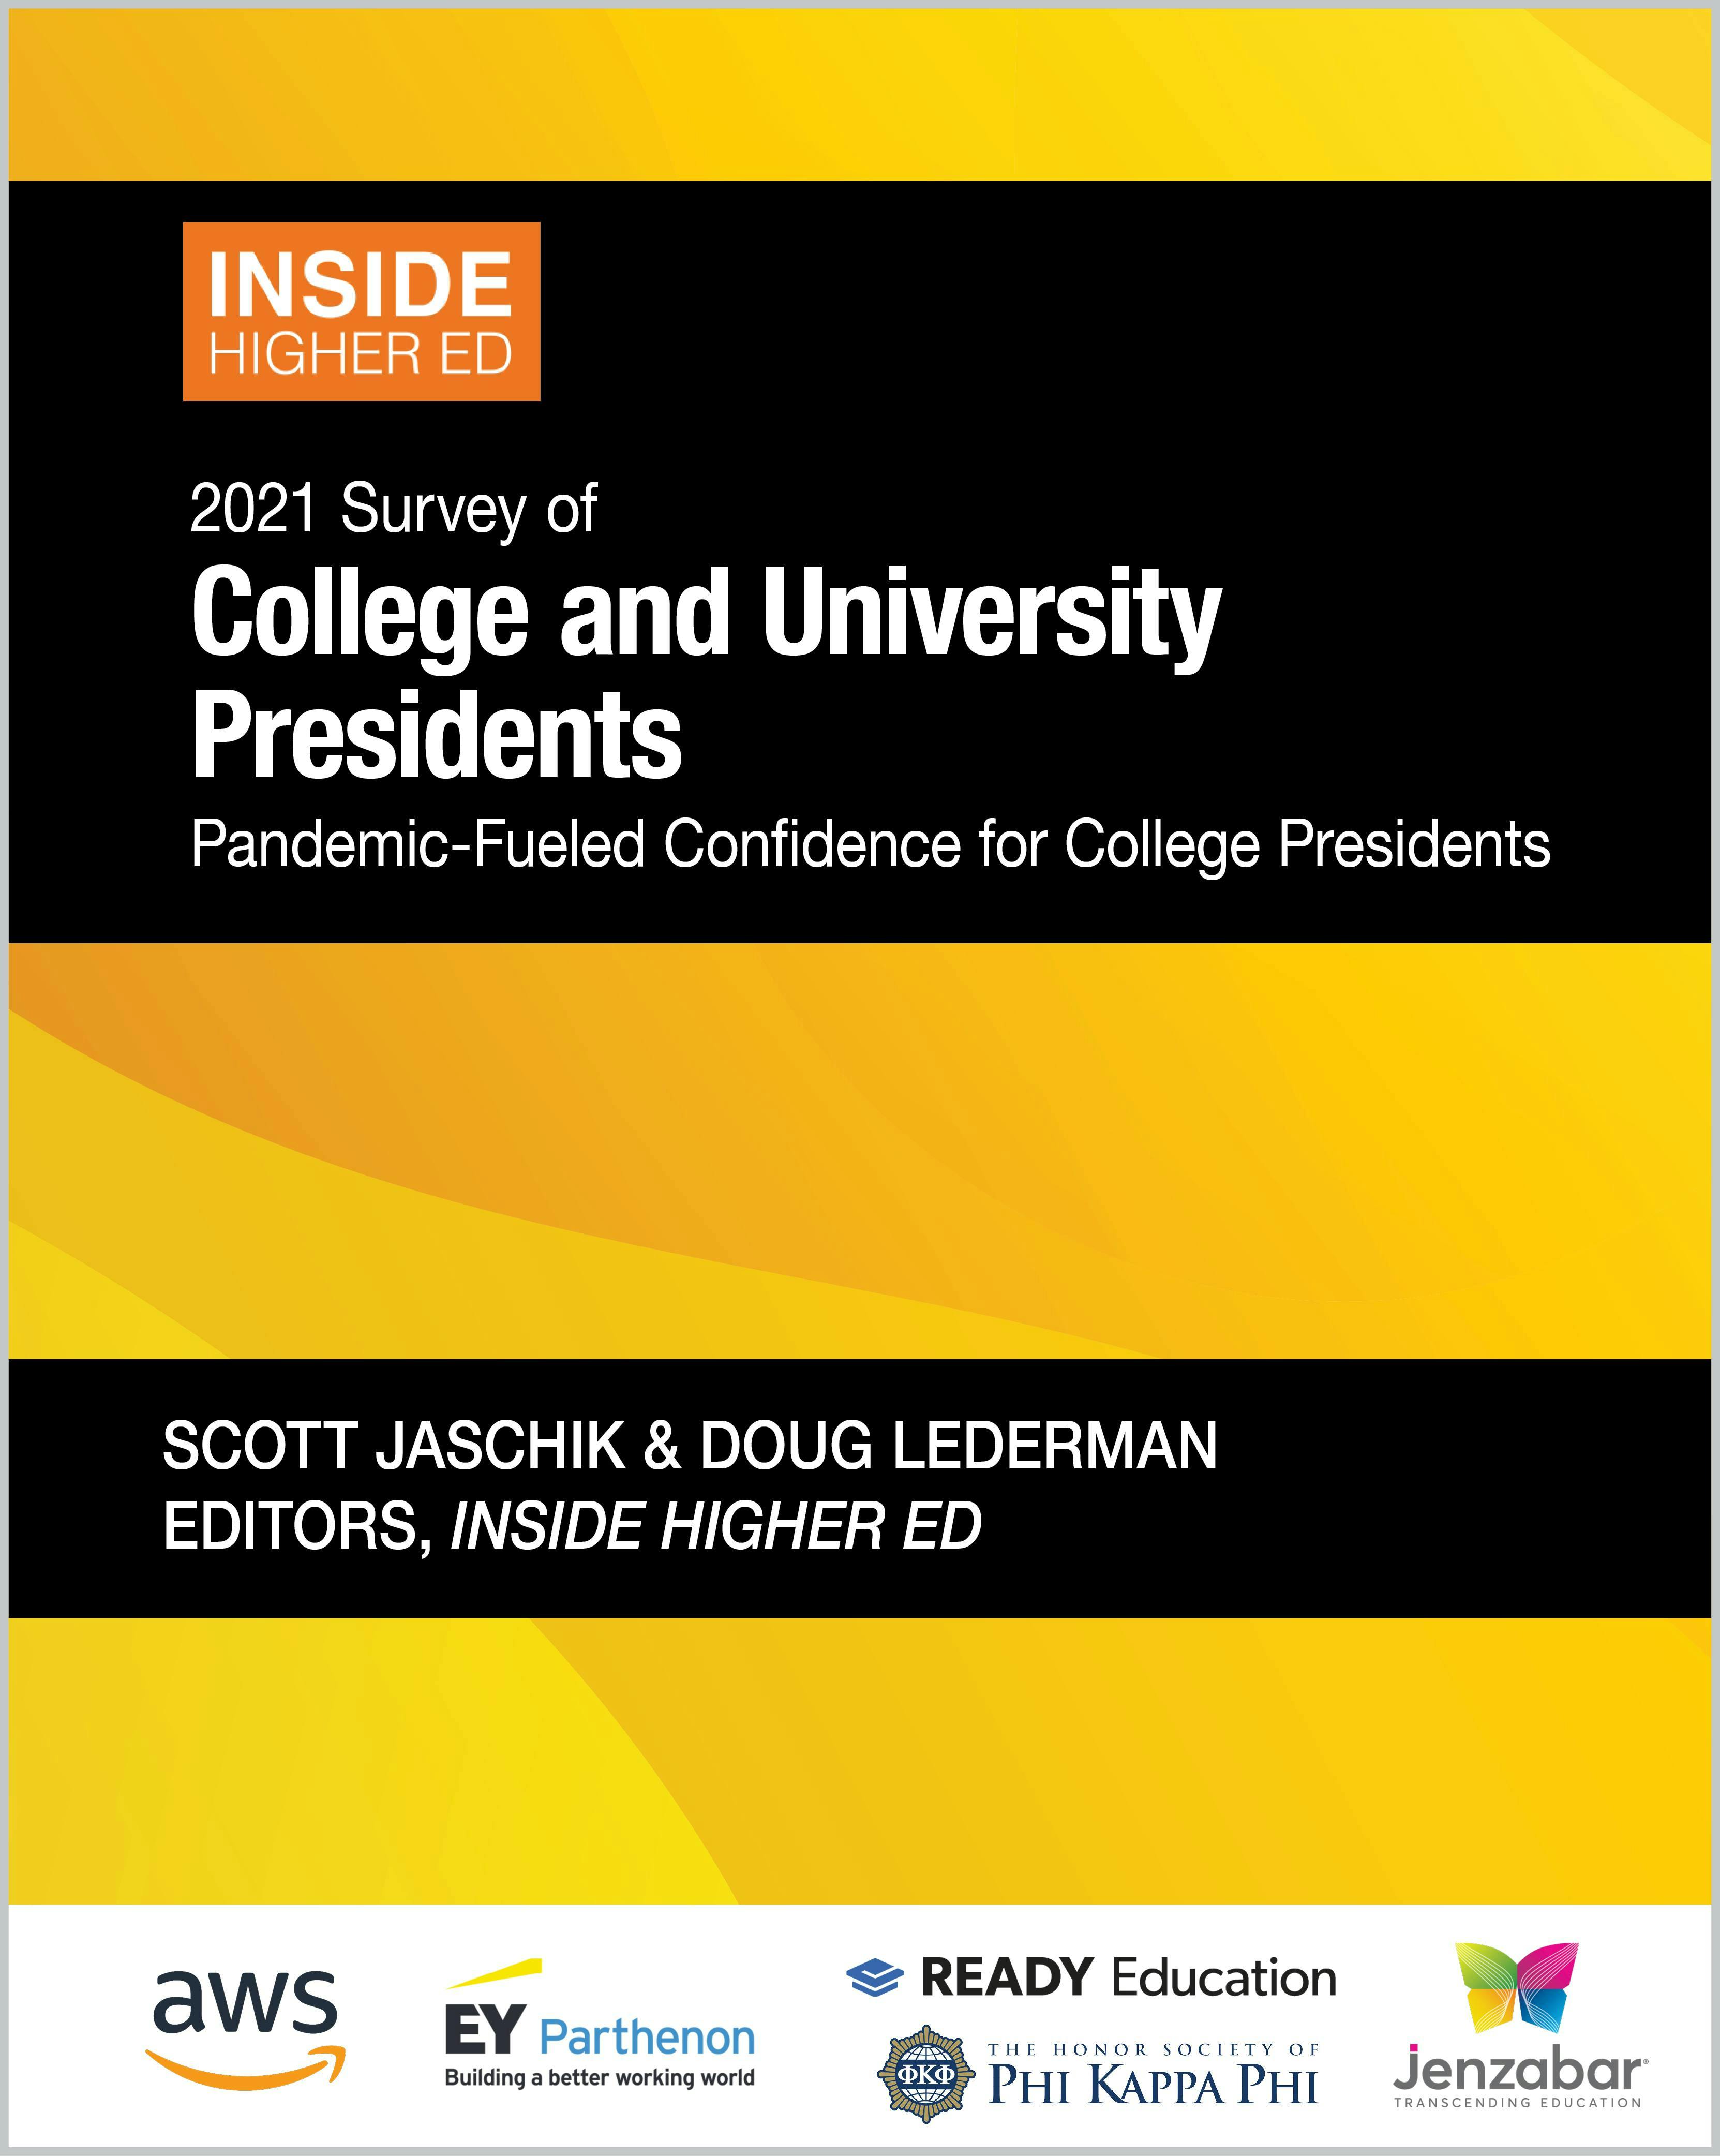 2021 Survey of College and University Presidents